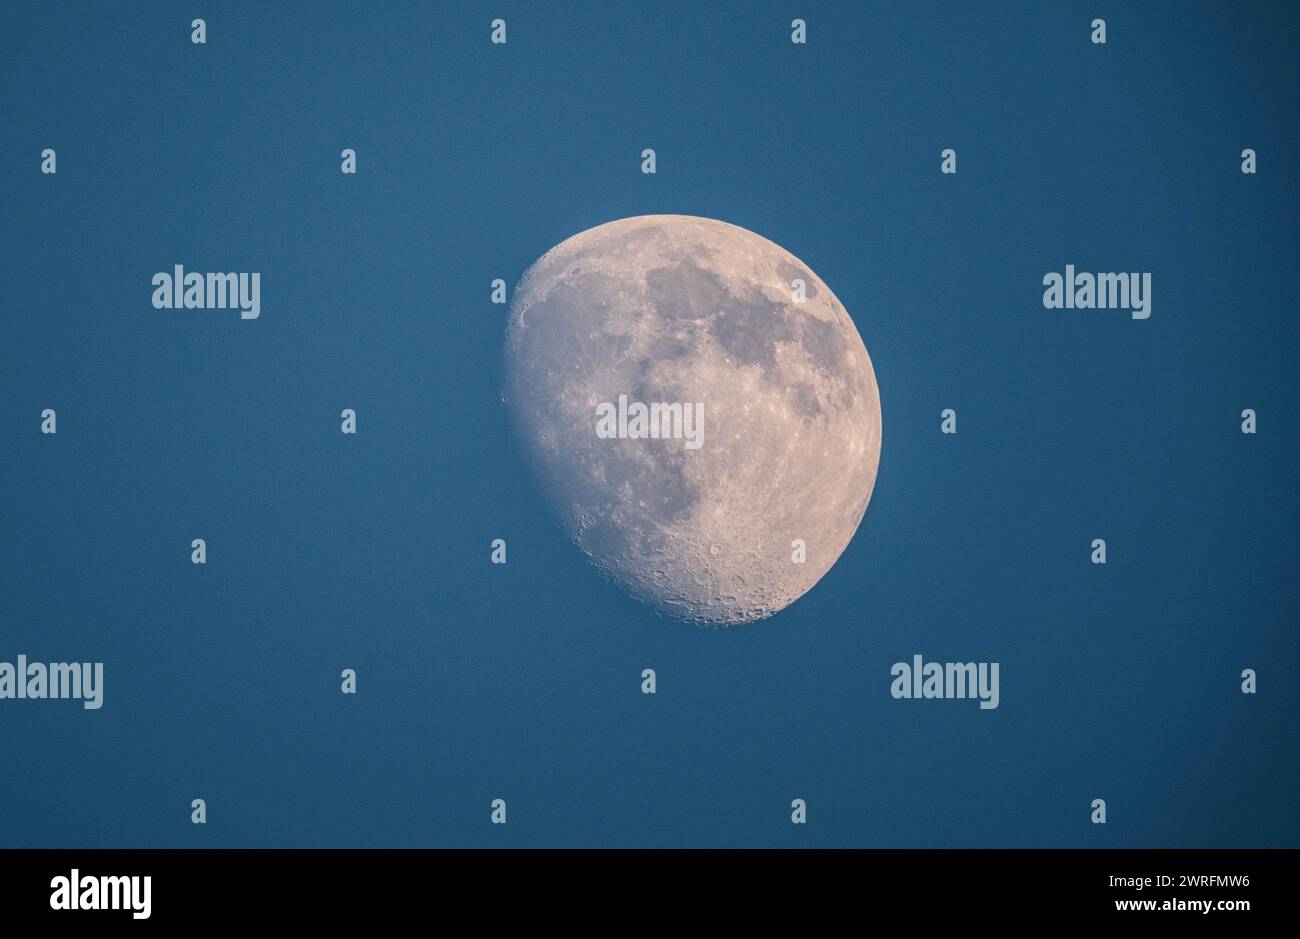 Clear view of the moon's surface during the waxing gibbous phase against a twilight sky Stock Photo